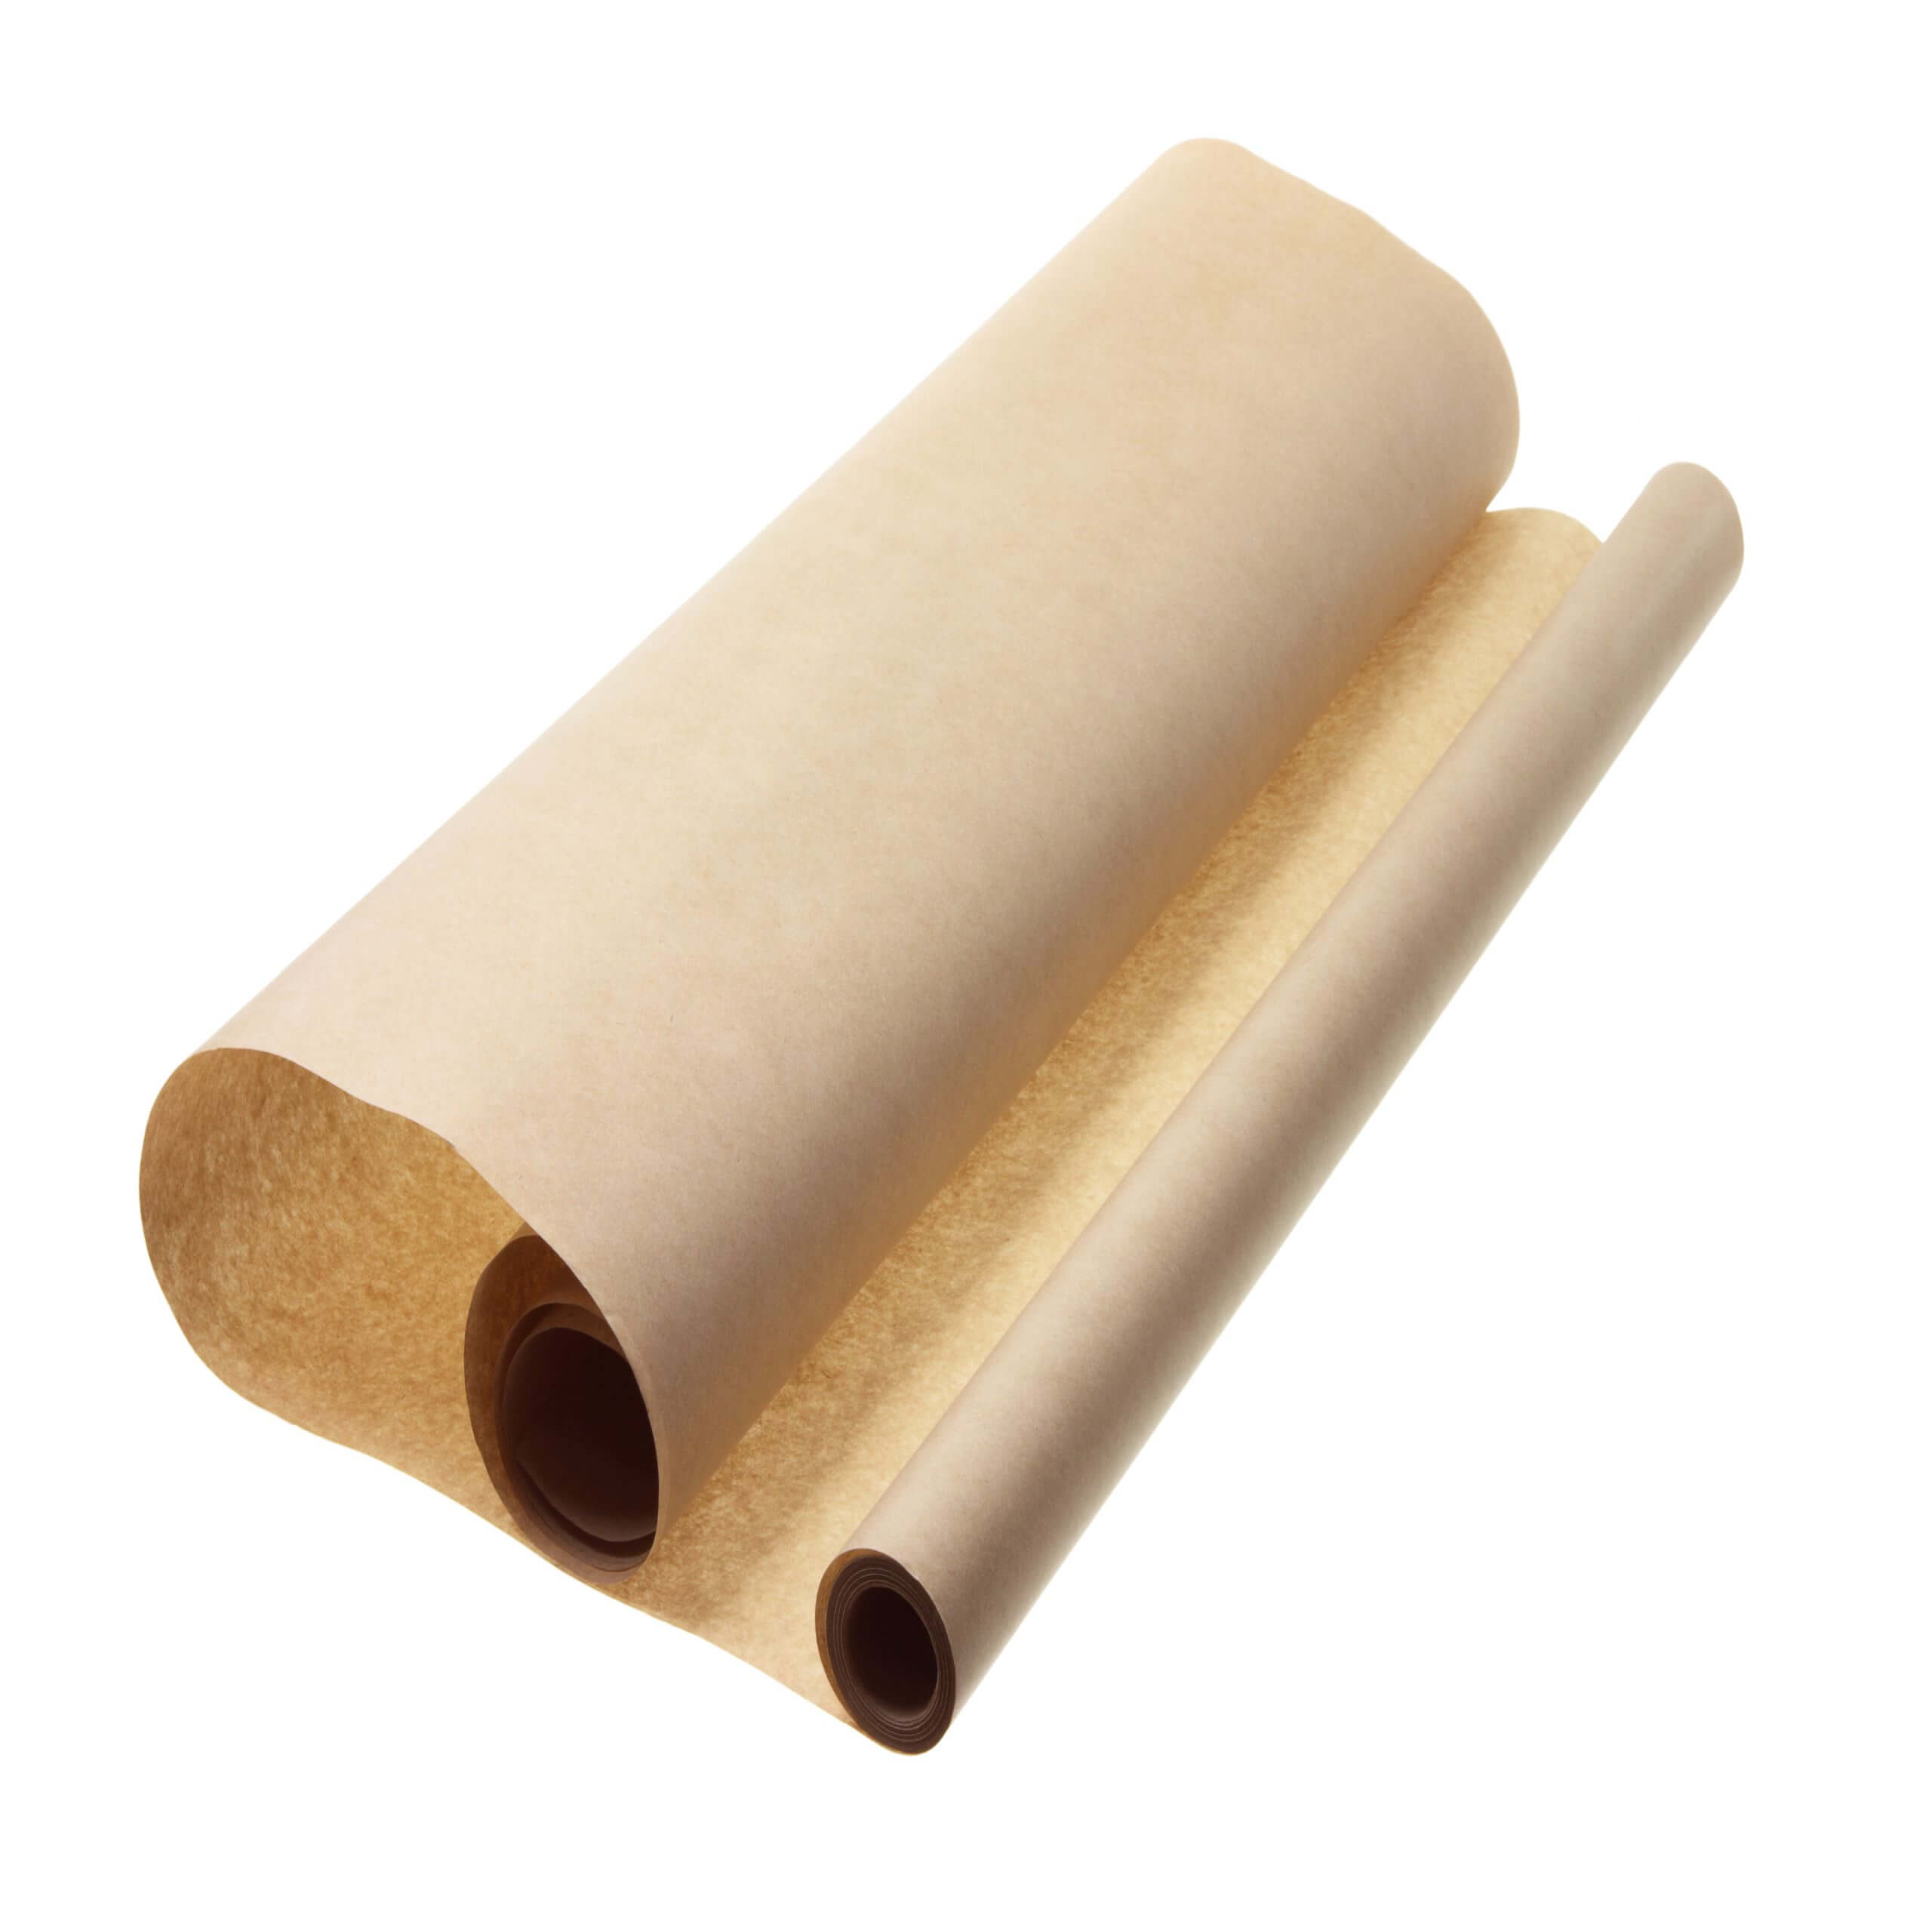 An image of a roll of our Imitation Kraft Paper.